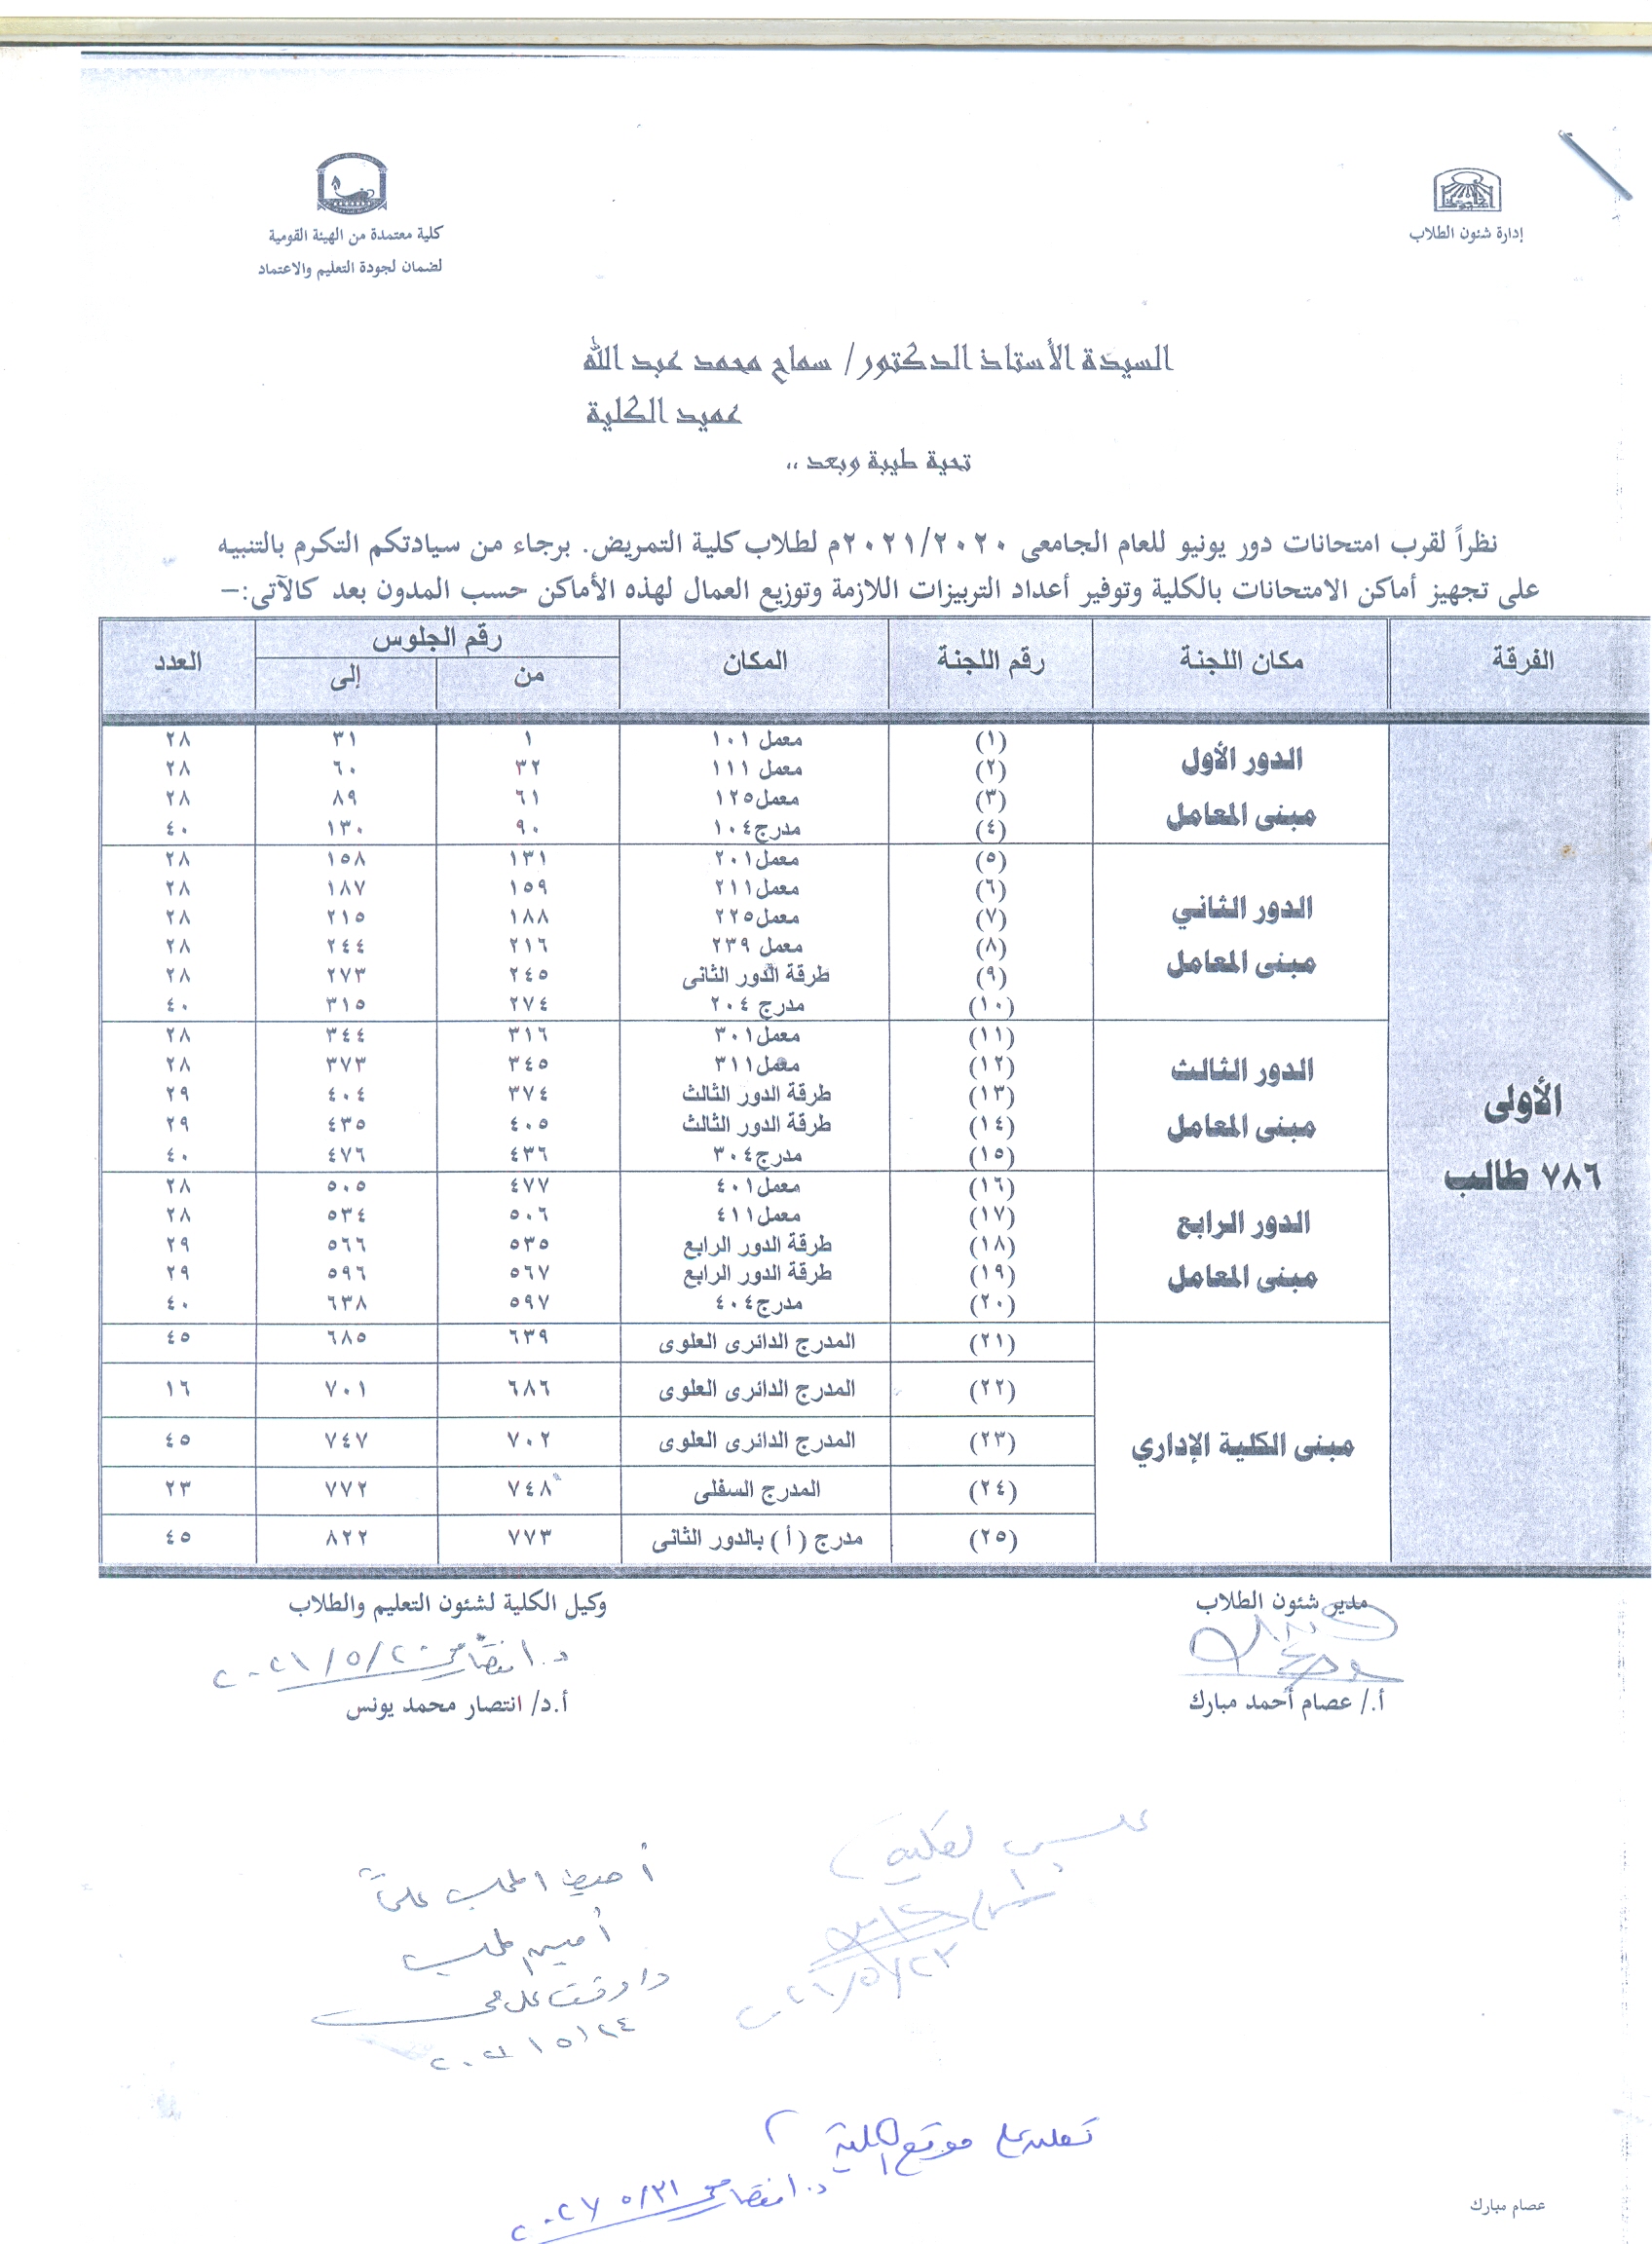 Locations of the June round exams committees for the first year 2021